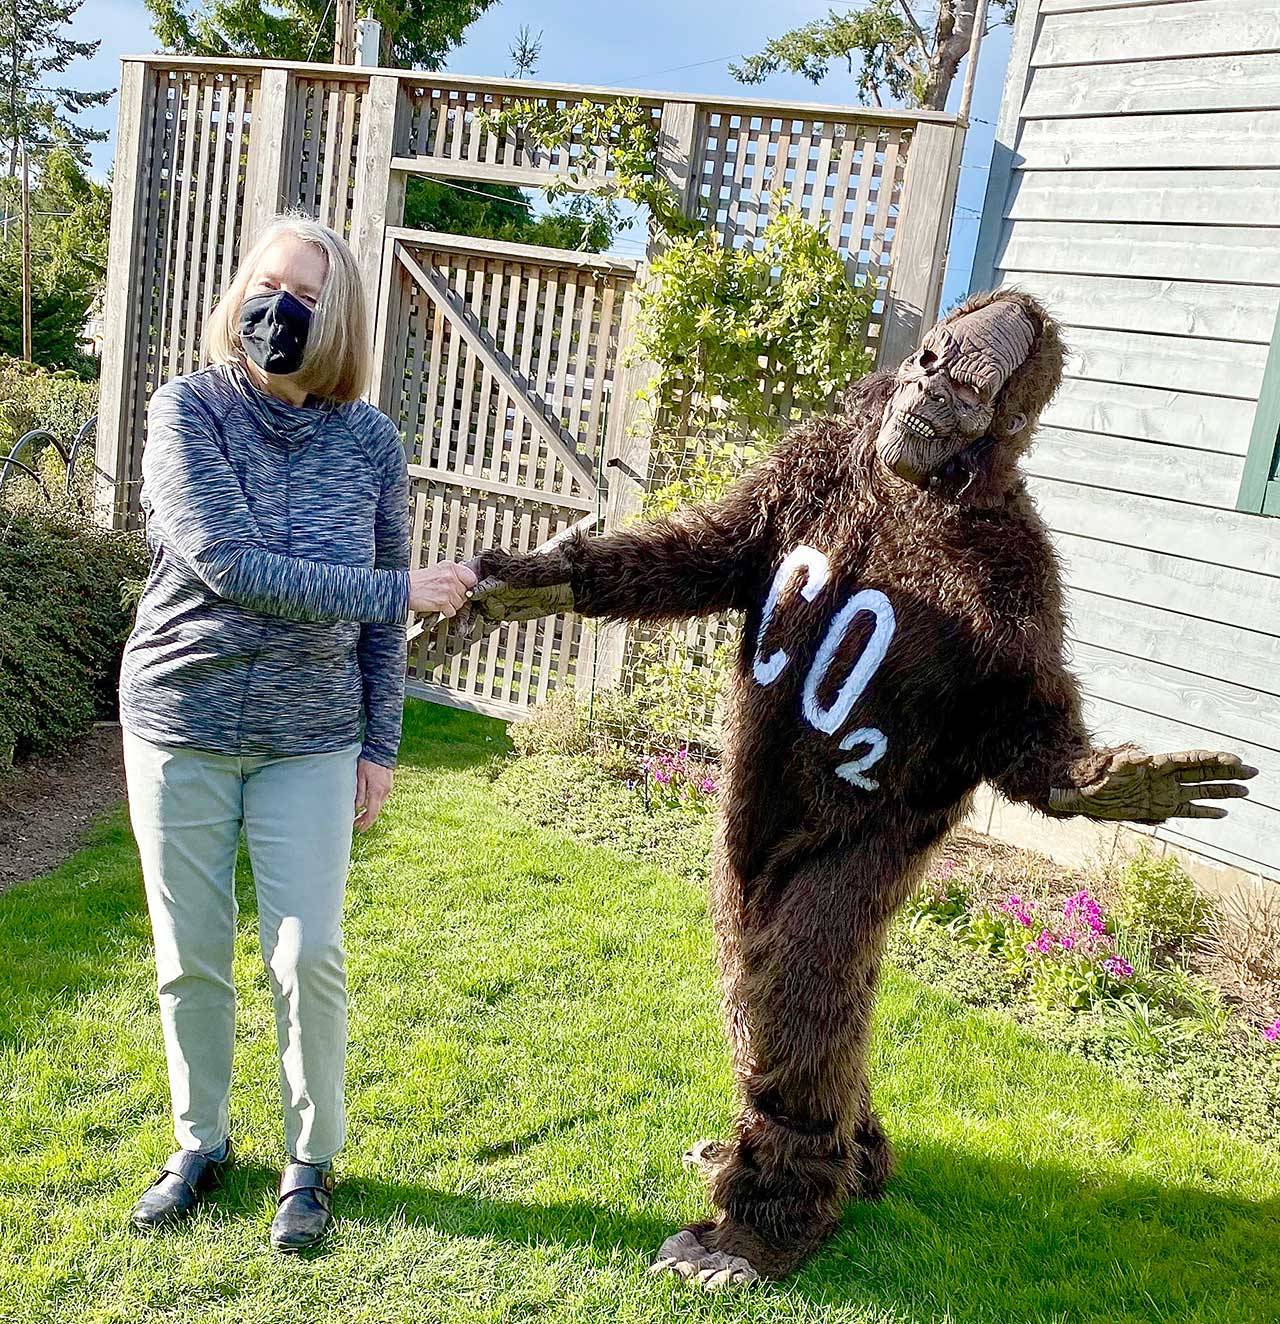 Carol Cummins of Port Townsend, winner of the Taming Bigfoot 2021 contest to reduce the carbon footprint in Jefferson County, receives congratulations from Bigfoot, otherwise known as Polly Lyle of Port Townsend. (Photo courtesy of Polly Lyle)